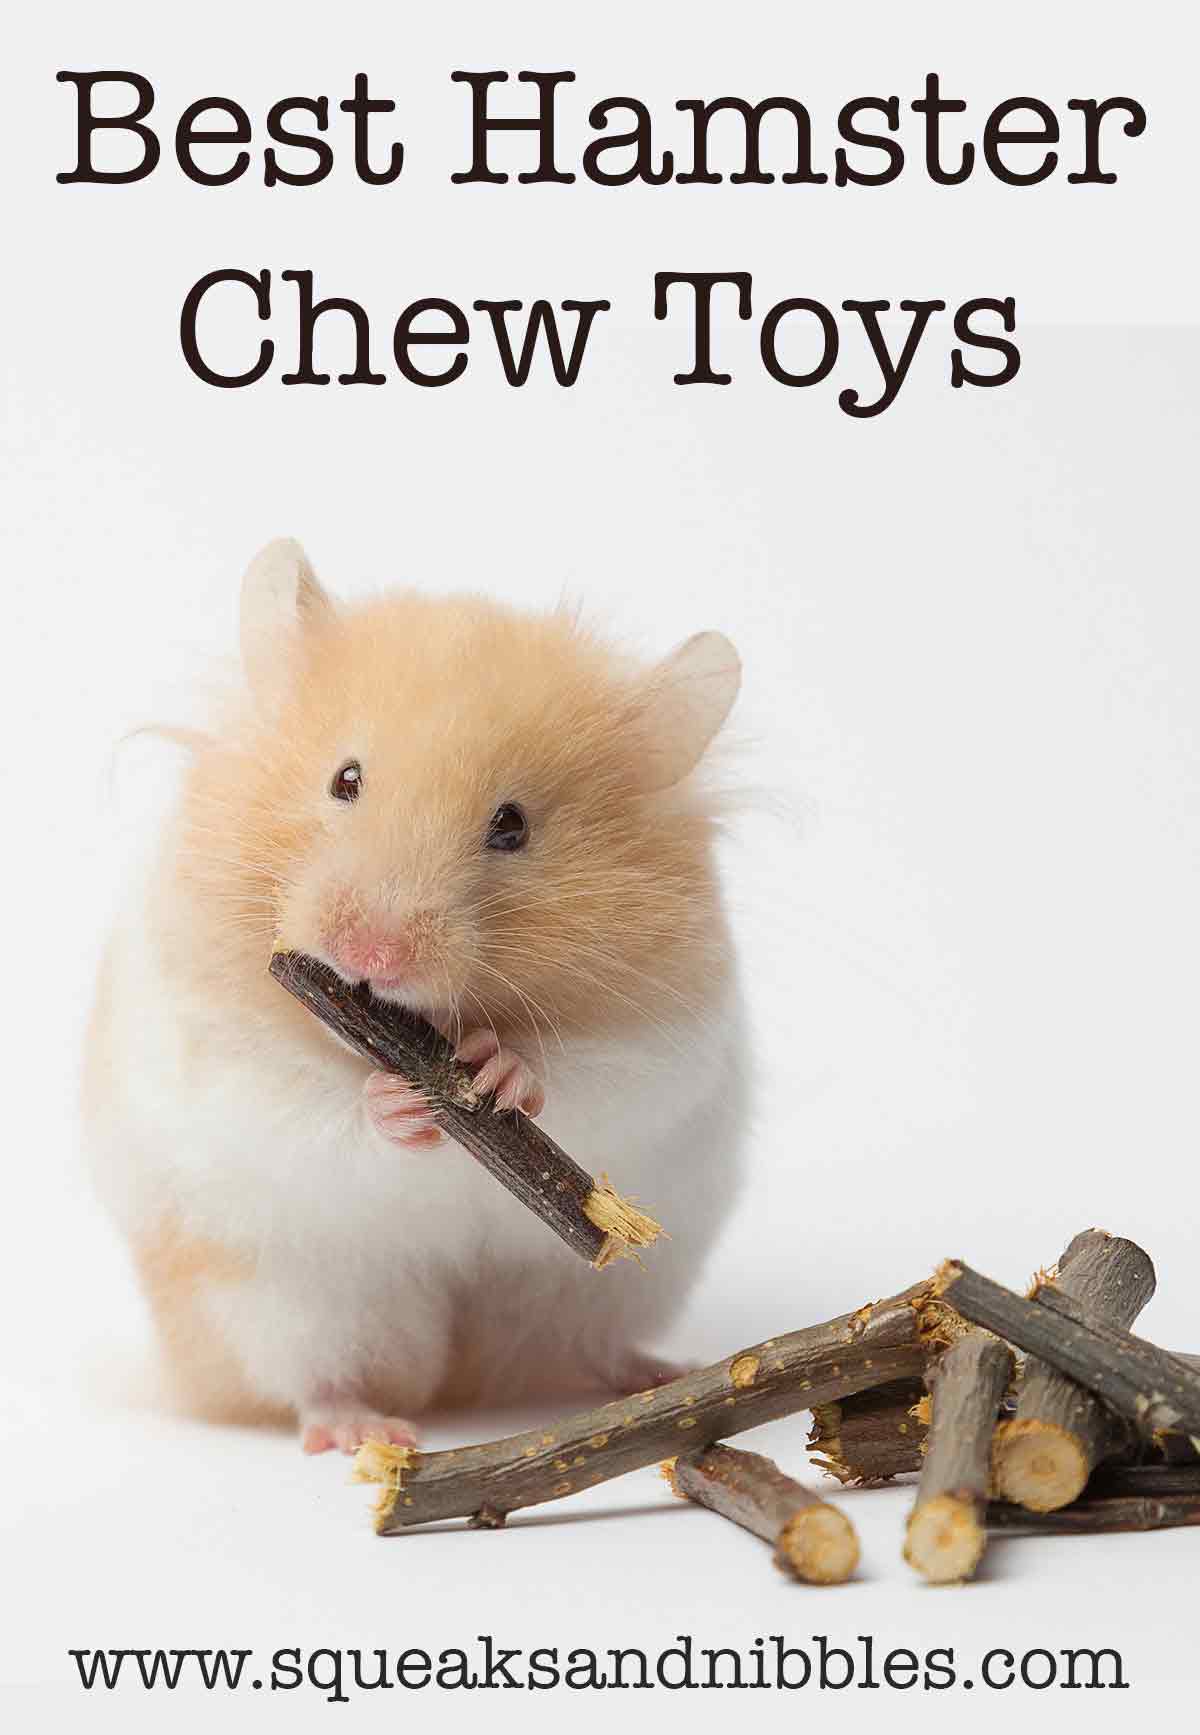 Soft Wood Chew Toy for Pocket Pets 2x1.5 Inches 6 Pack 100% Organic Wood SunGrow Cholla Wood for Hamsters Perfect for Climbing